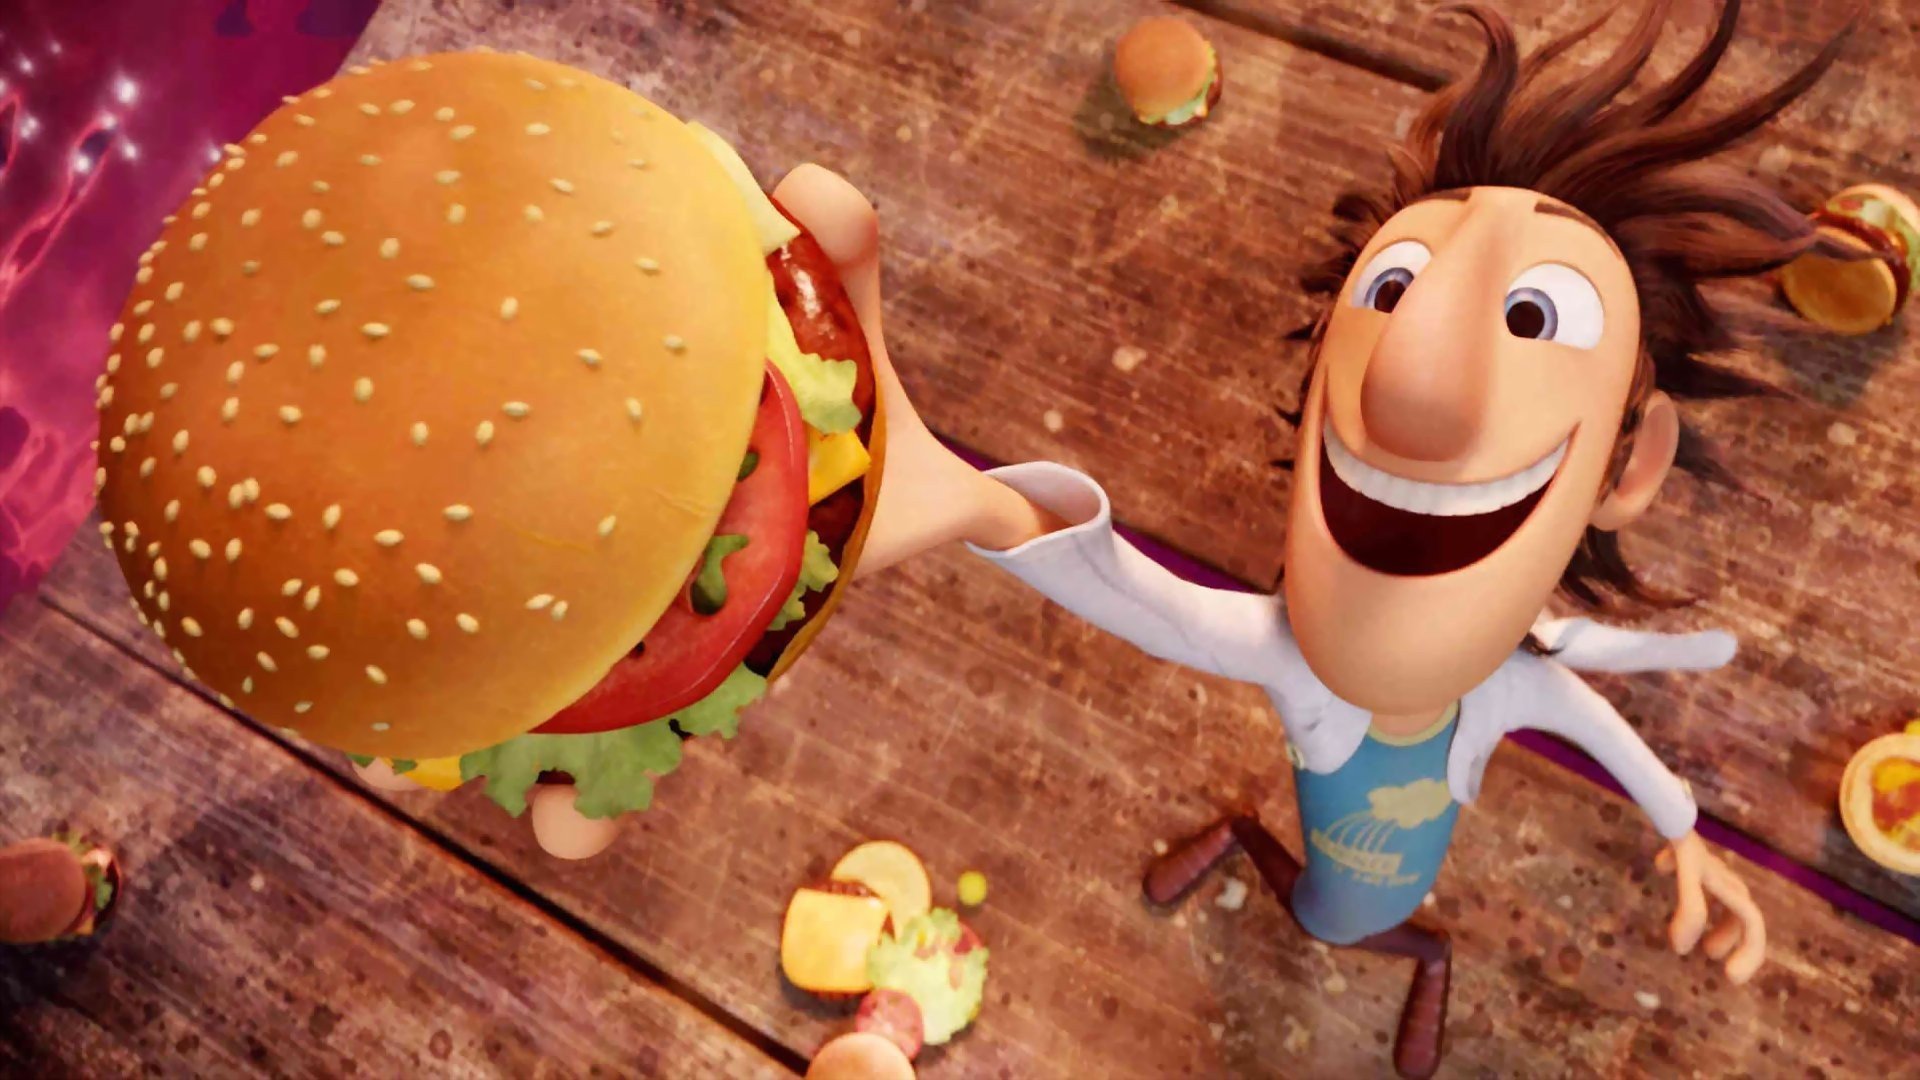 Awesome Cloudy With A Chance Of Meatballs free wallpaper ID:168916 for full hd 1920x1080 desktop